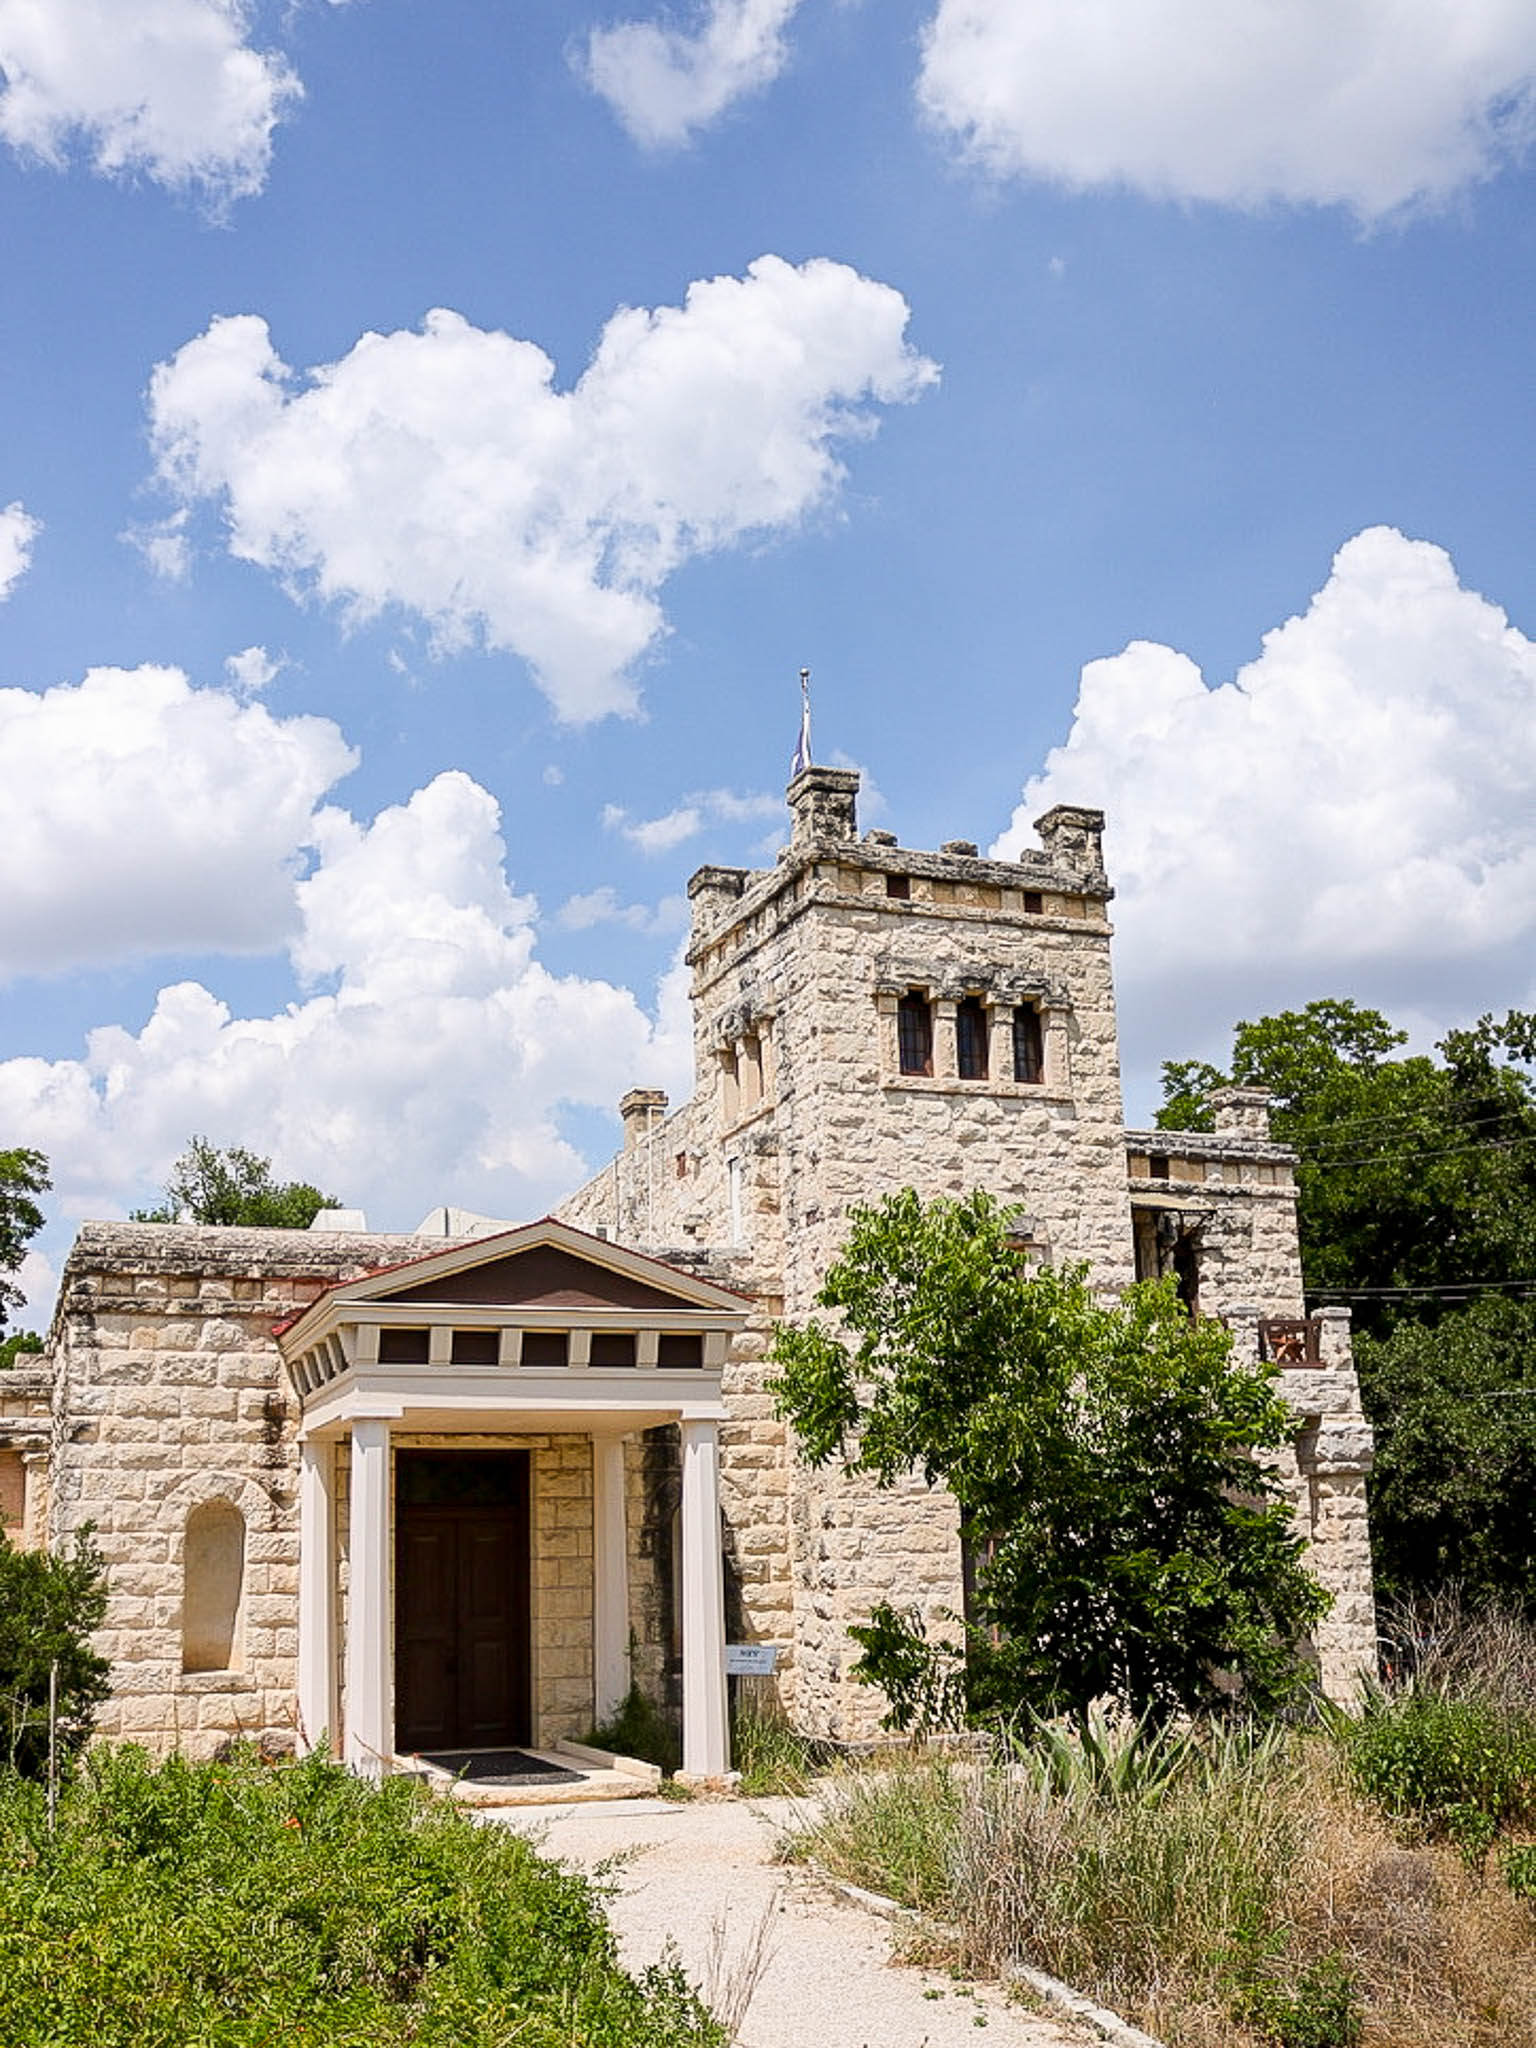 ELISABET NEY MUSEUM - 101 free things to do in ATX!